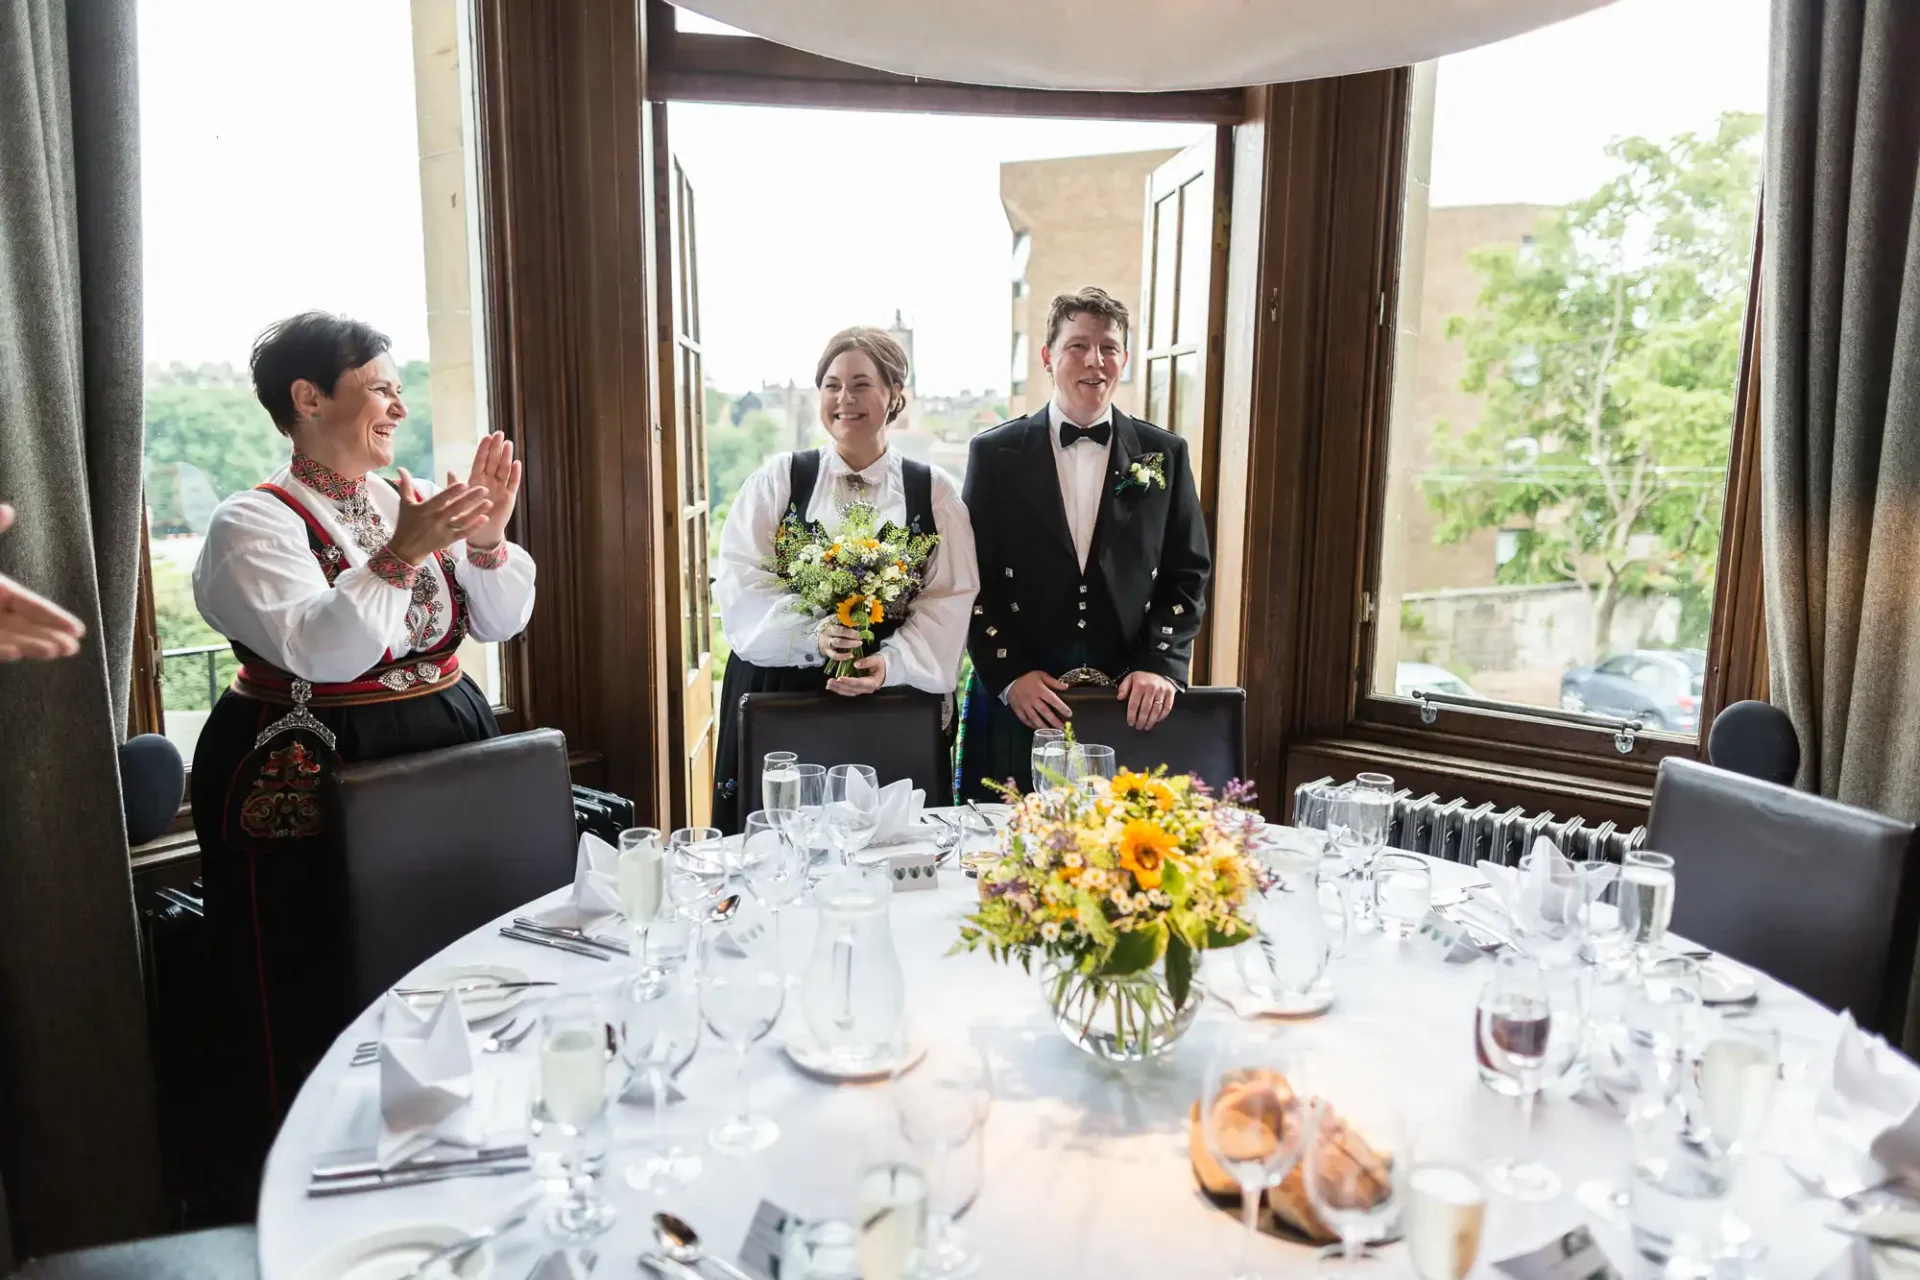 A wedding couple stands smiling at a decorated table in a restaurant, with a guest clapping and a city view through large windows.